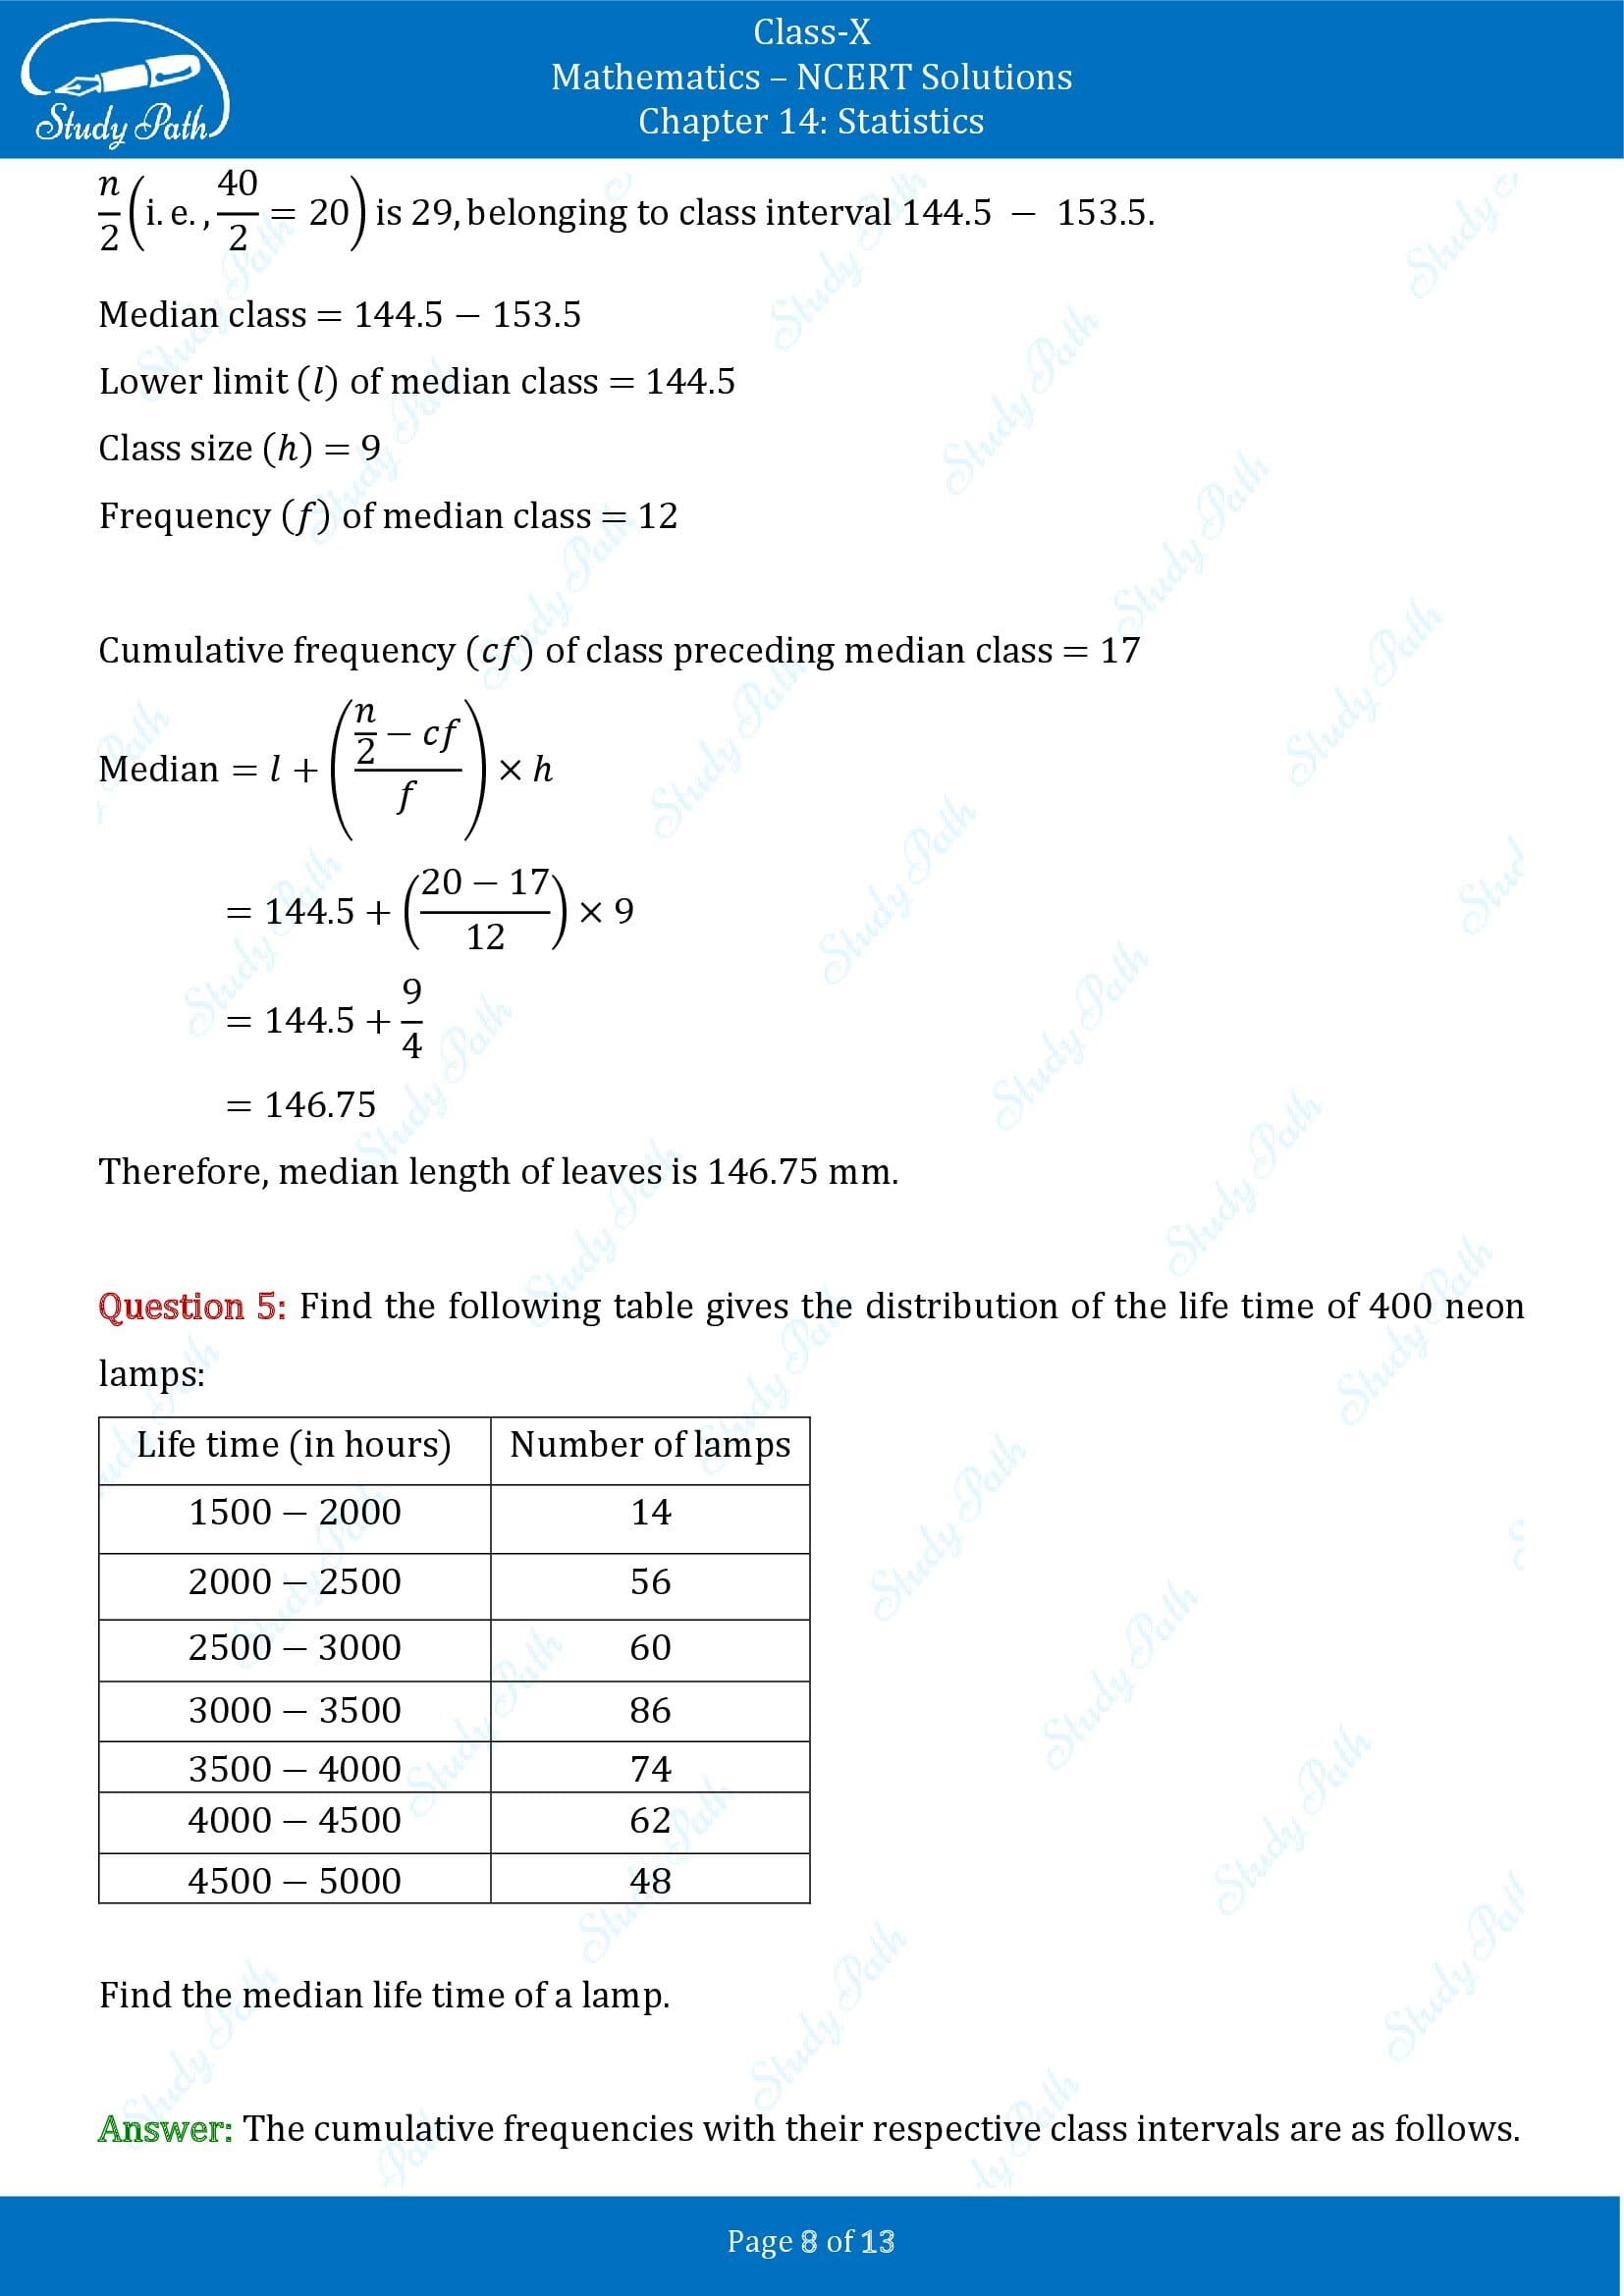 NCERT Solutions for Class 10 Maths Chapter 14 Statistics Exercise 14.3 00008